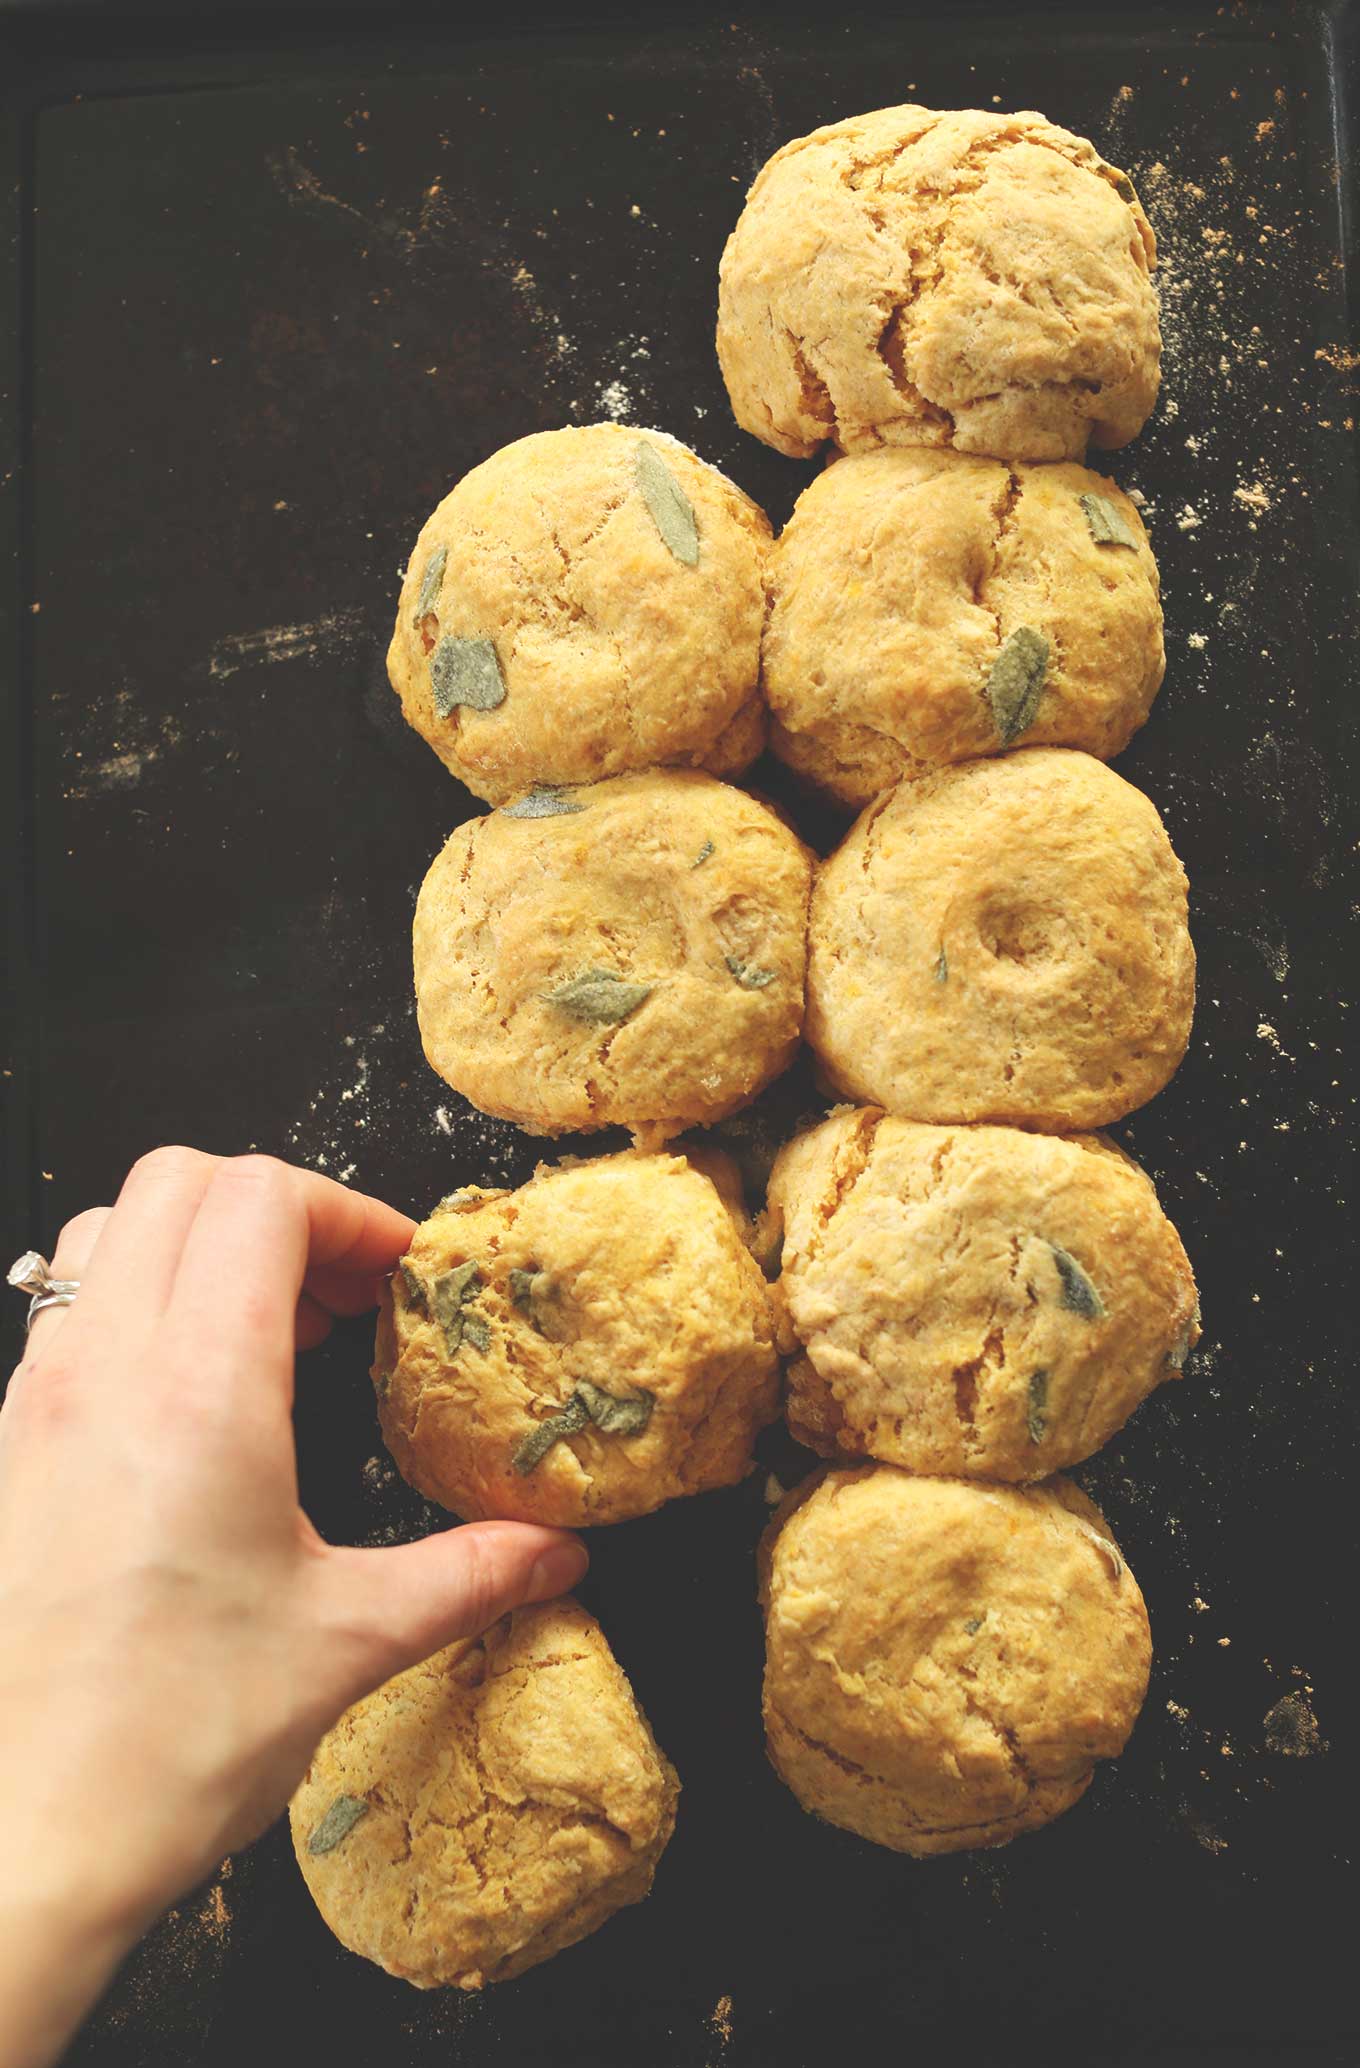 Grabbing one of our Pumpkin Sage Biscuits from the baking sheet